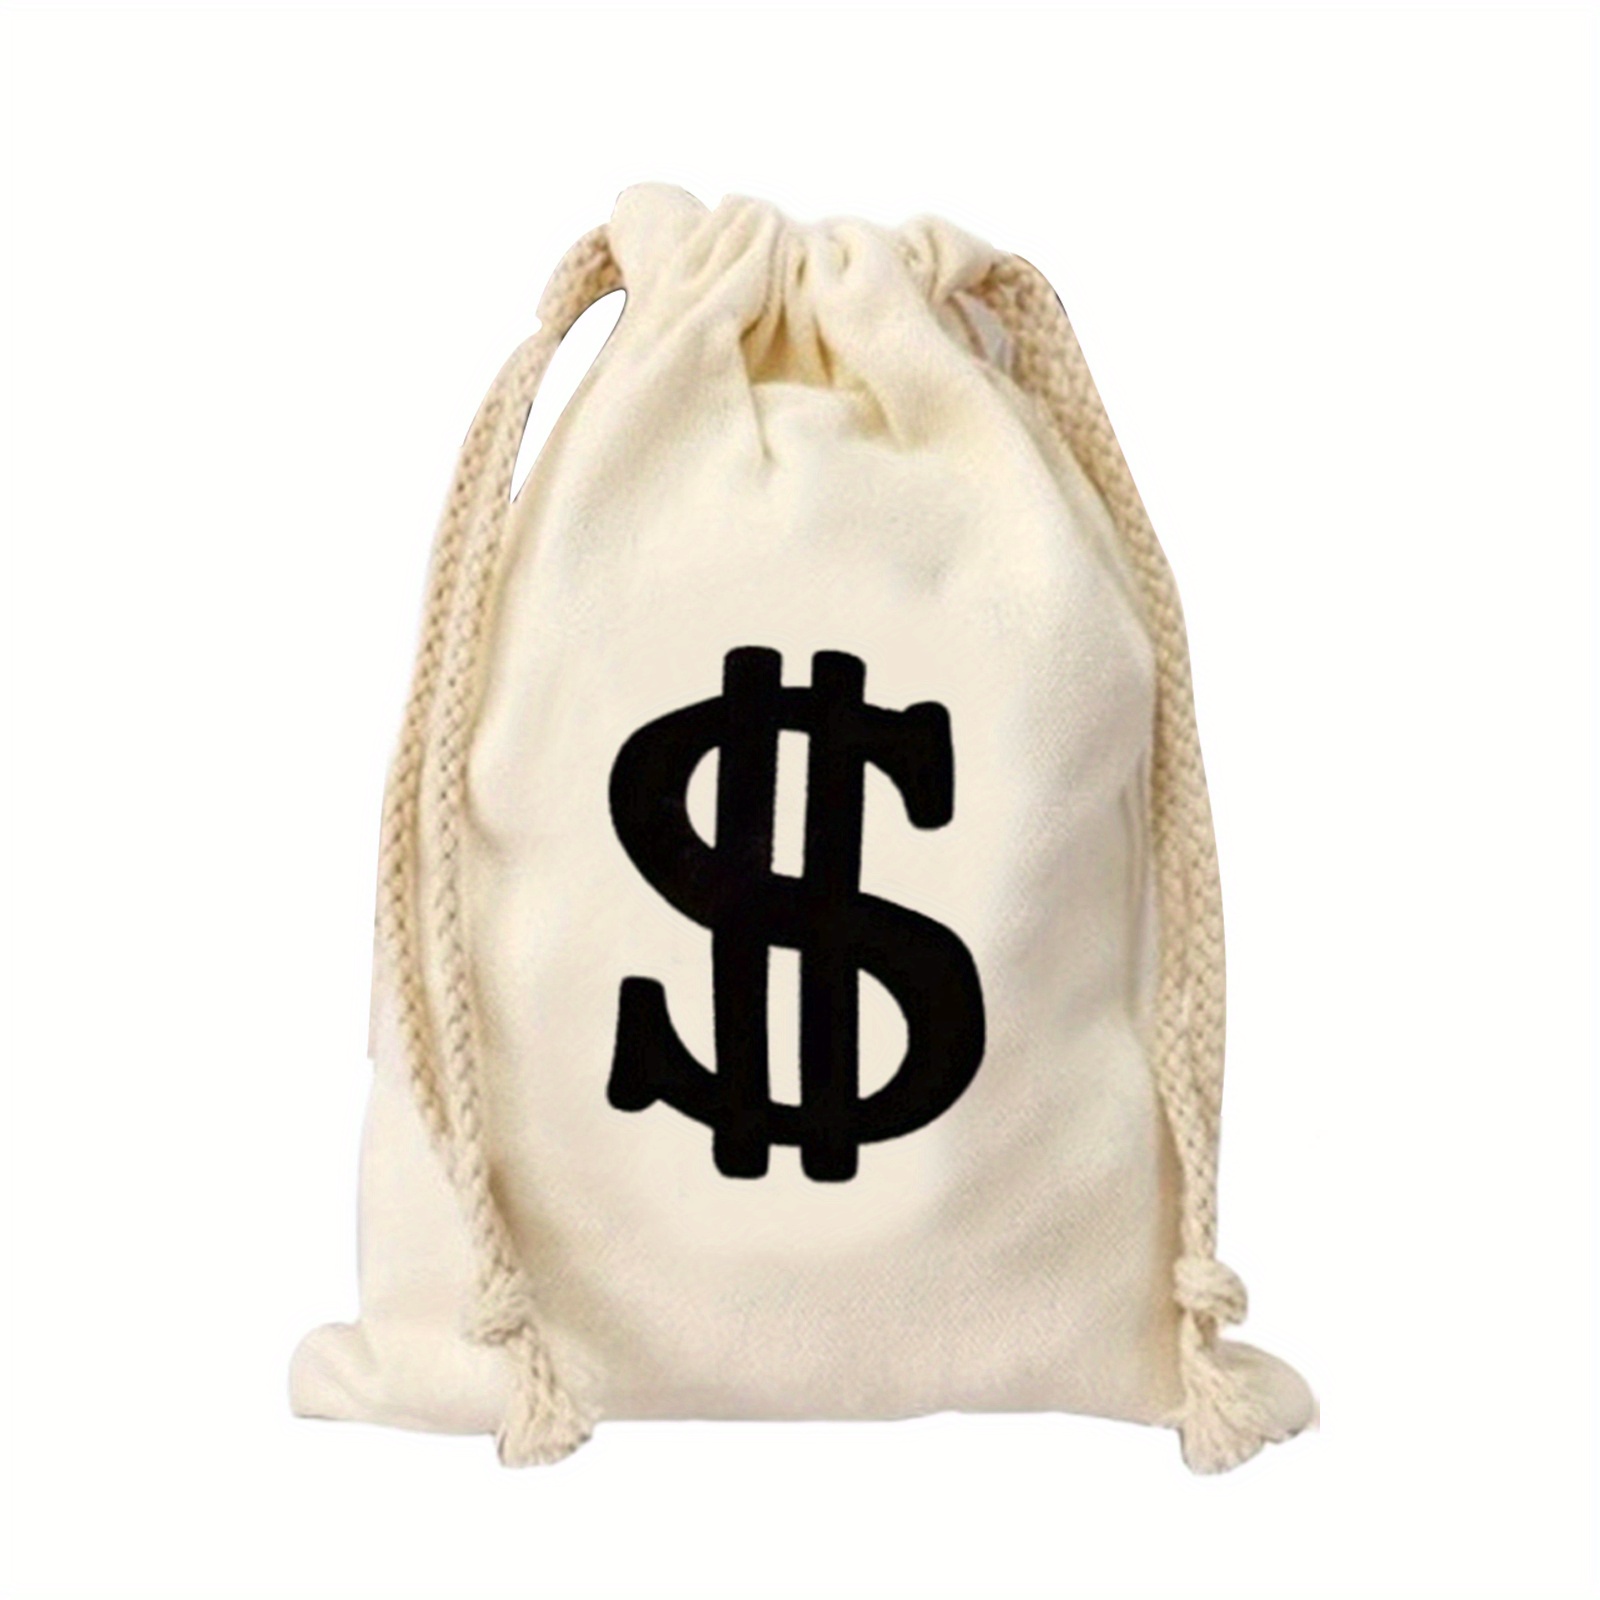  Apipi Canvas Money Bags for Party, 6.3 x 9 Inches